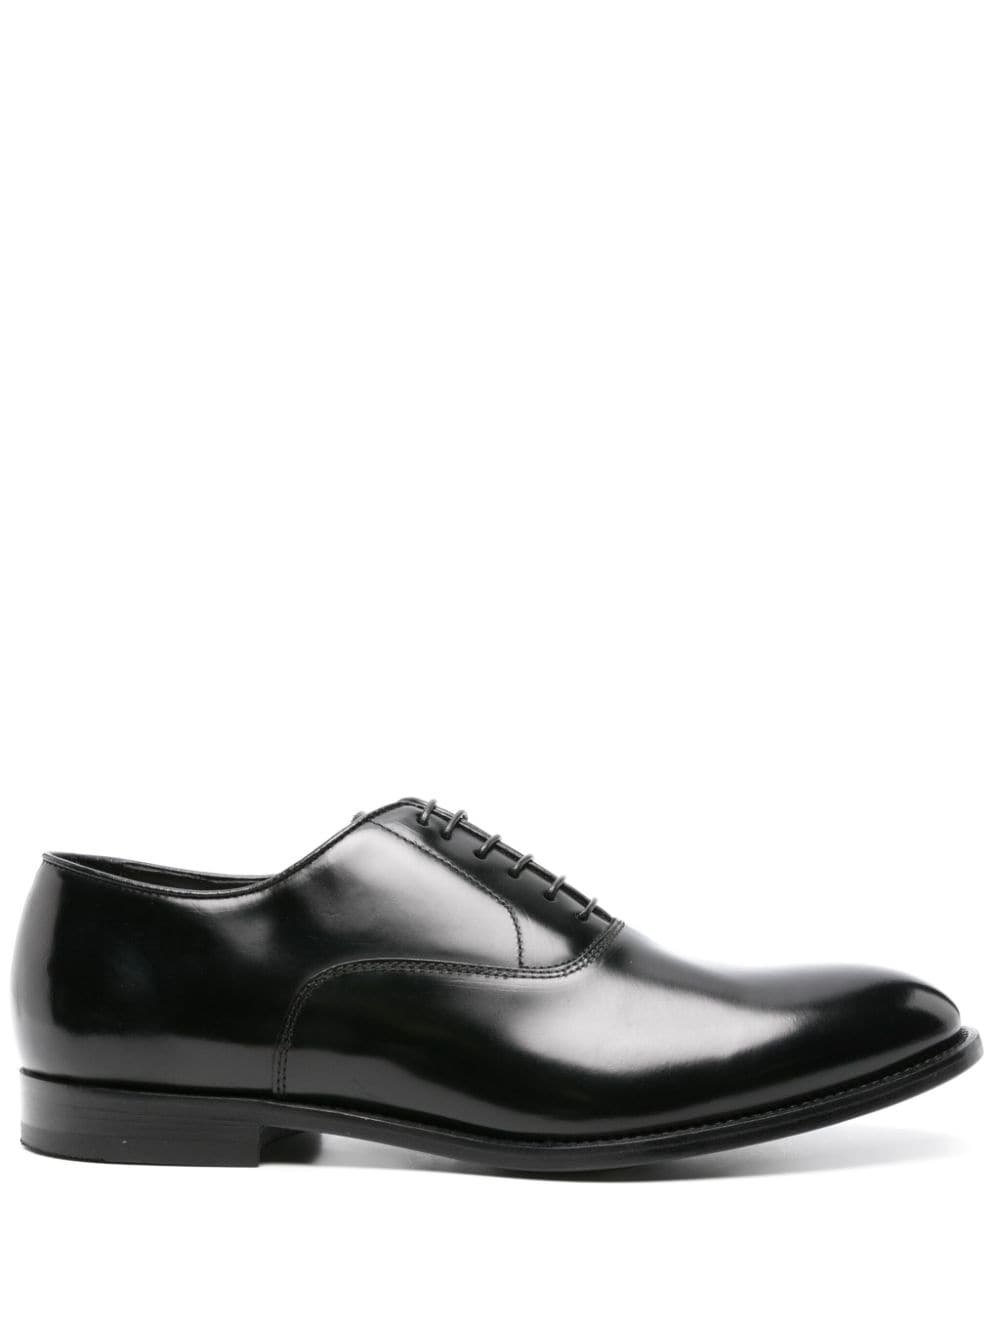 Doucal's leather Oxford shoes - Black